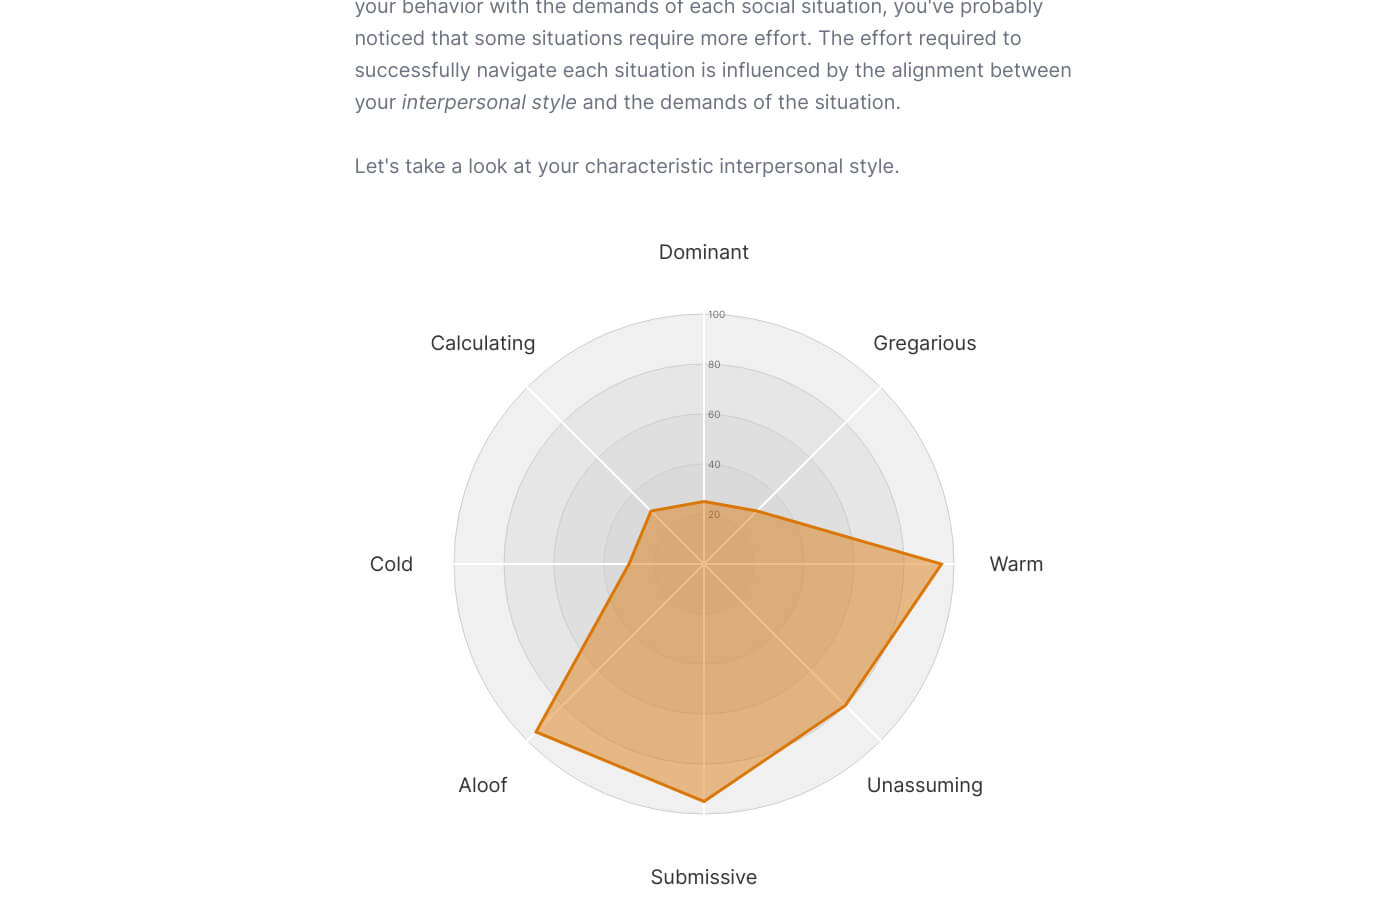 TraitLab includes an analysis of your characteristic way of interacting with others, while StrengthsFinder 2.0 may tell you whether you have a particular strength related to relationship building or influencing others.